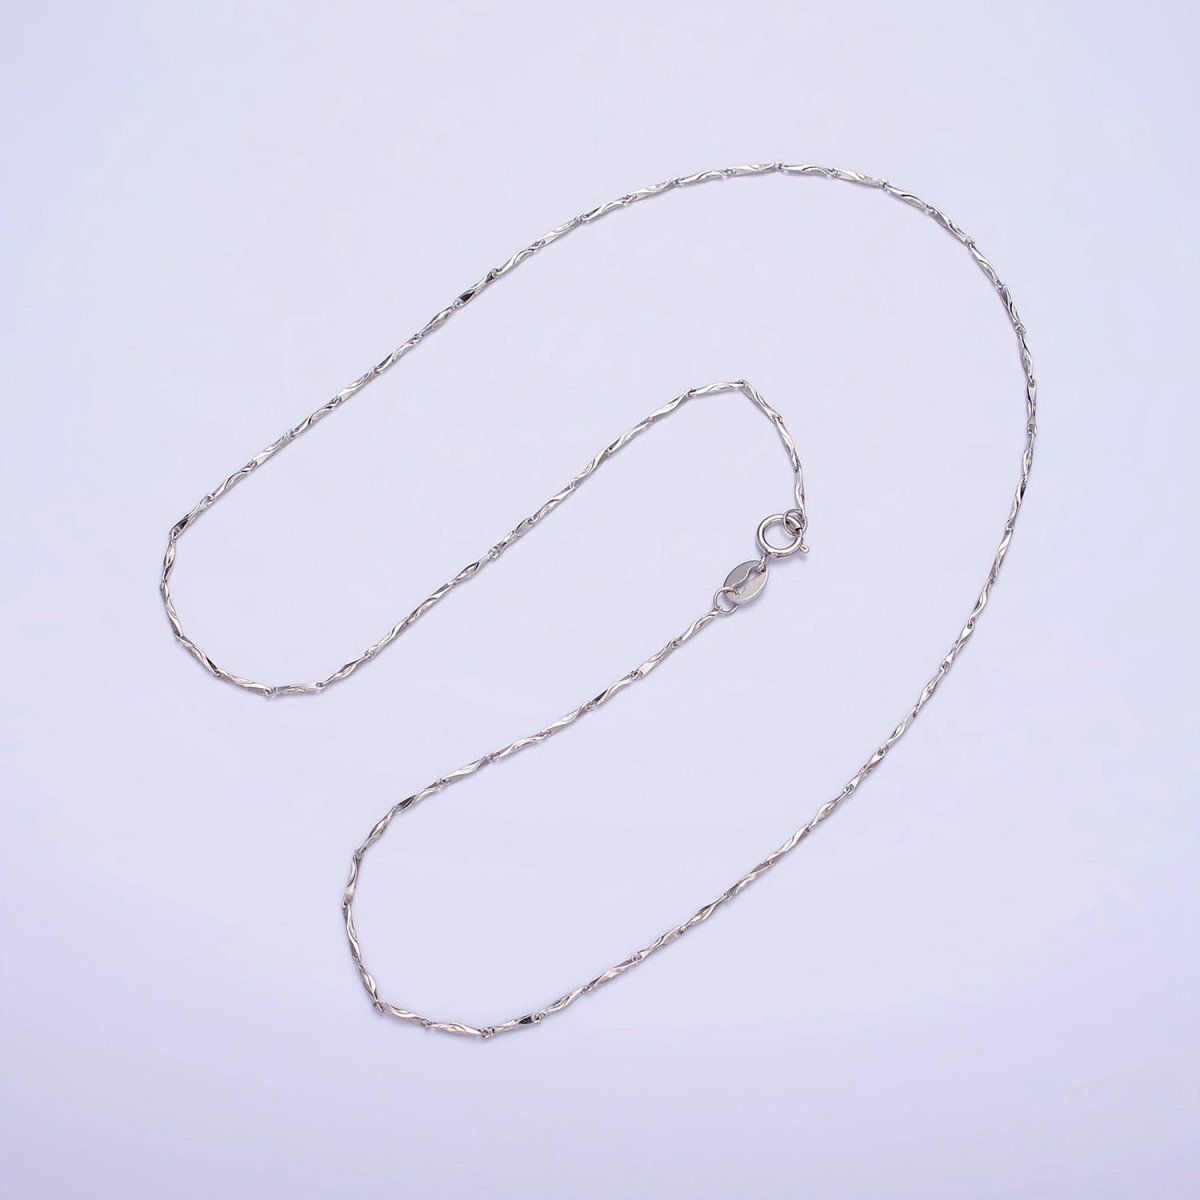 Fine s925 Sterling Silver 0.5mm Fancy Barleycorn Cable Chain Necklace 16 inch | WA-1985 Clearance Pricing - DLUXCA